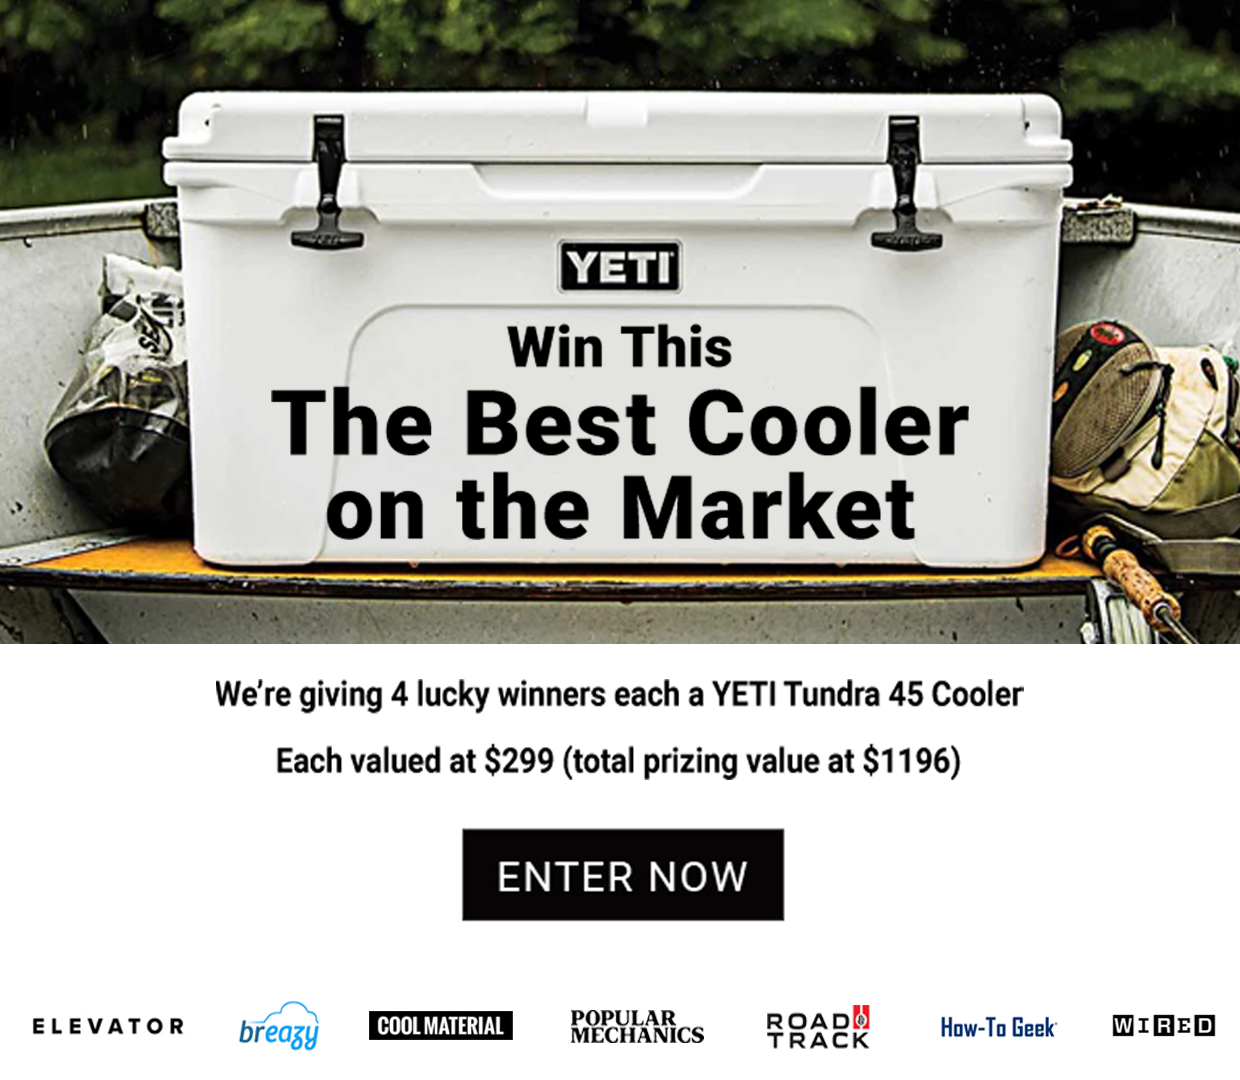 Enter for your chance to win a YETI Tundra 45 cooler! There will be FOUR lucky winners. Each cooler is valued at $299.